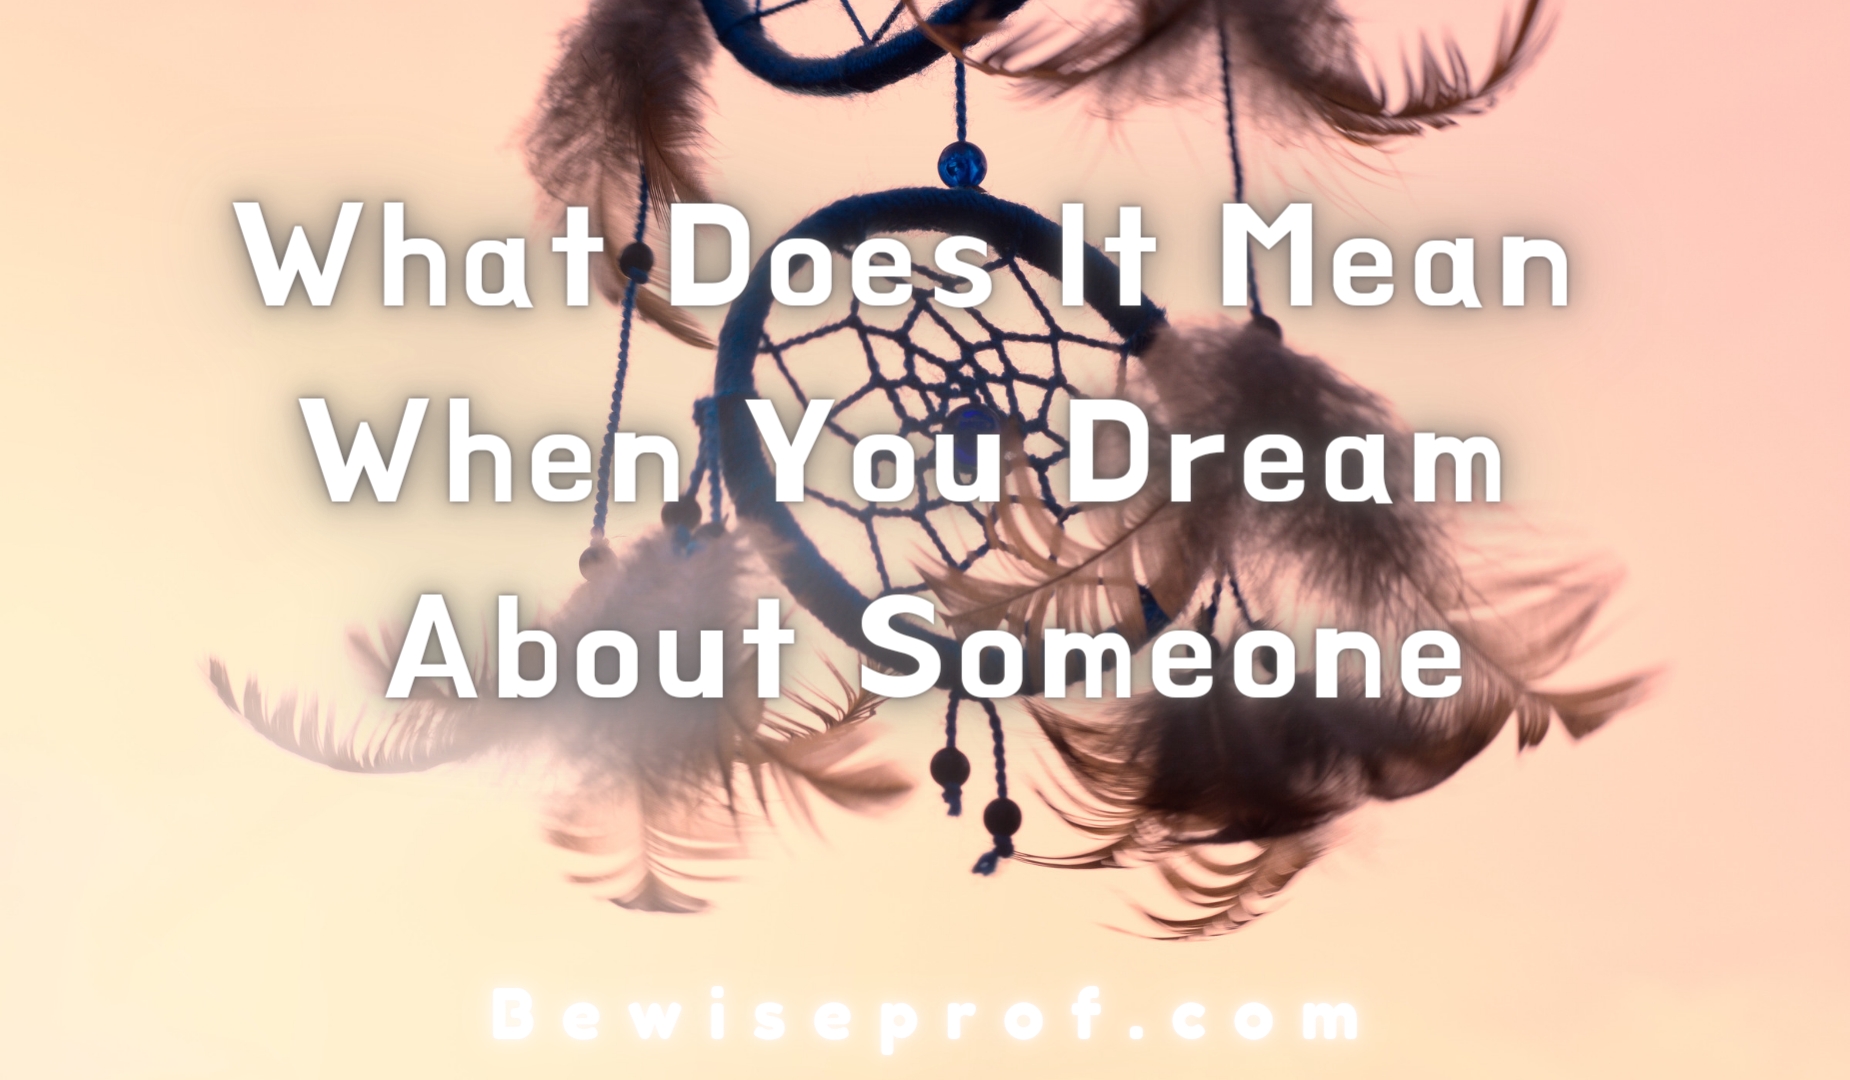 What Does It Mean When You Dream About Someone